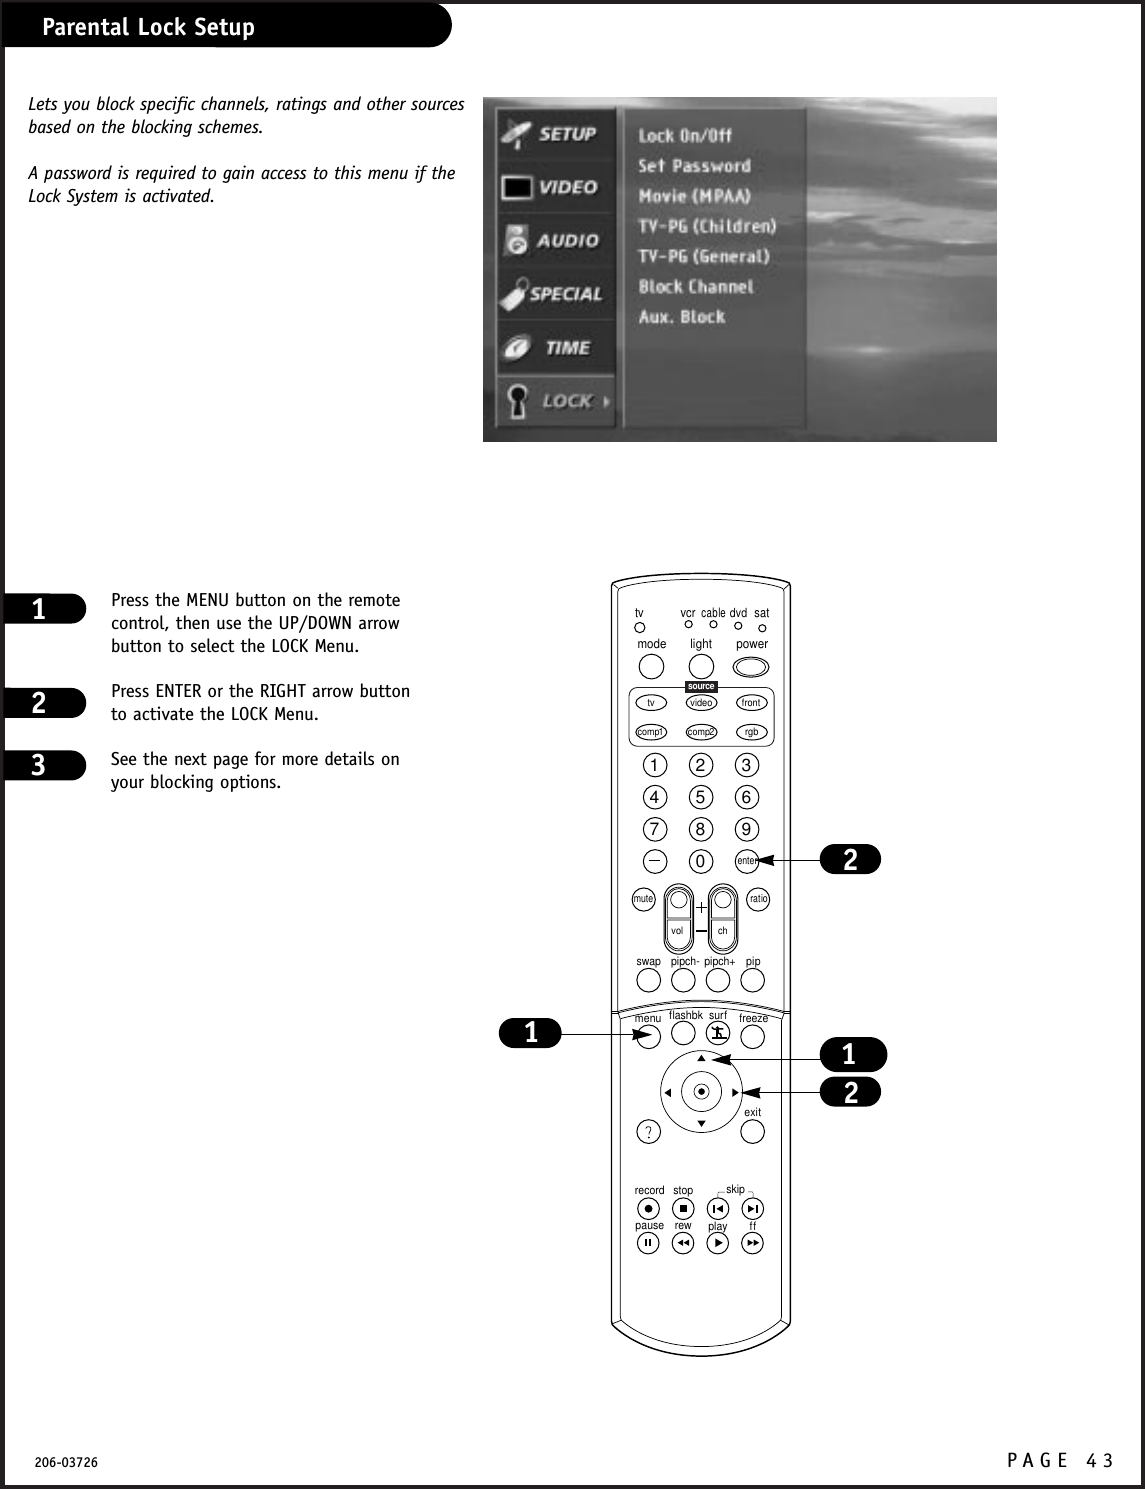 P A GE 43206-03726Parental Lock SetupPress the MENU button on the remotecontrol, then use the UP/DOWN arrowbutton to select the LOCK Menu.Press ENTER or the RIGHT arrow buttonto activate the LOCK Menu.See the next page for more details onyour blocking options.1231234567890tvmode light power   tv video frontcomp1 rgbvcrcabledvdsatmuteswap pipch- pipch+ pipmenurecord stoppause rew play ffexitflashbk surf freezevol chratiocomp2skipsourceenter1212Lets you block specific channels, ratings and other sourcesbased on the blocking schemes.A password is required to gain access to this menu if theLock System is activated.